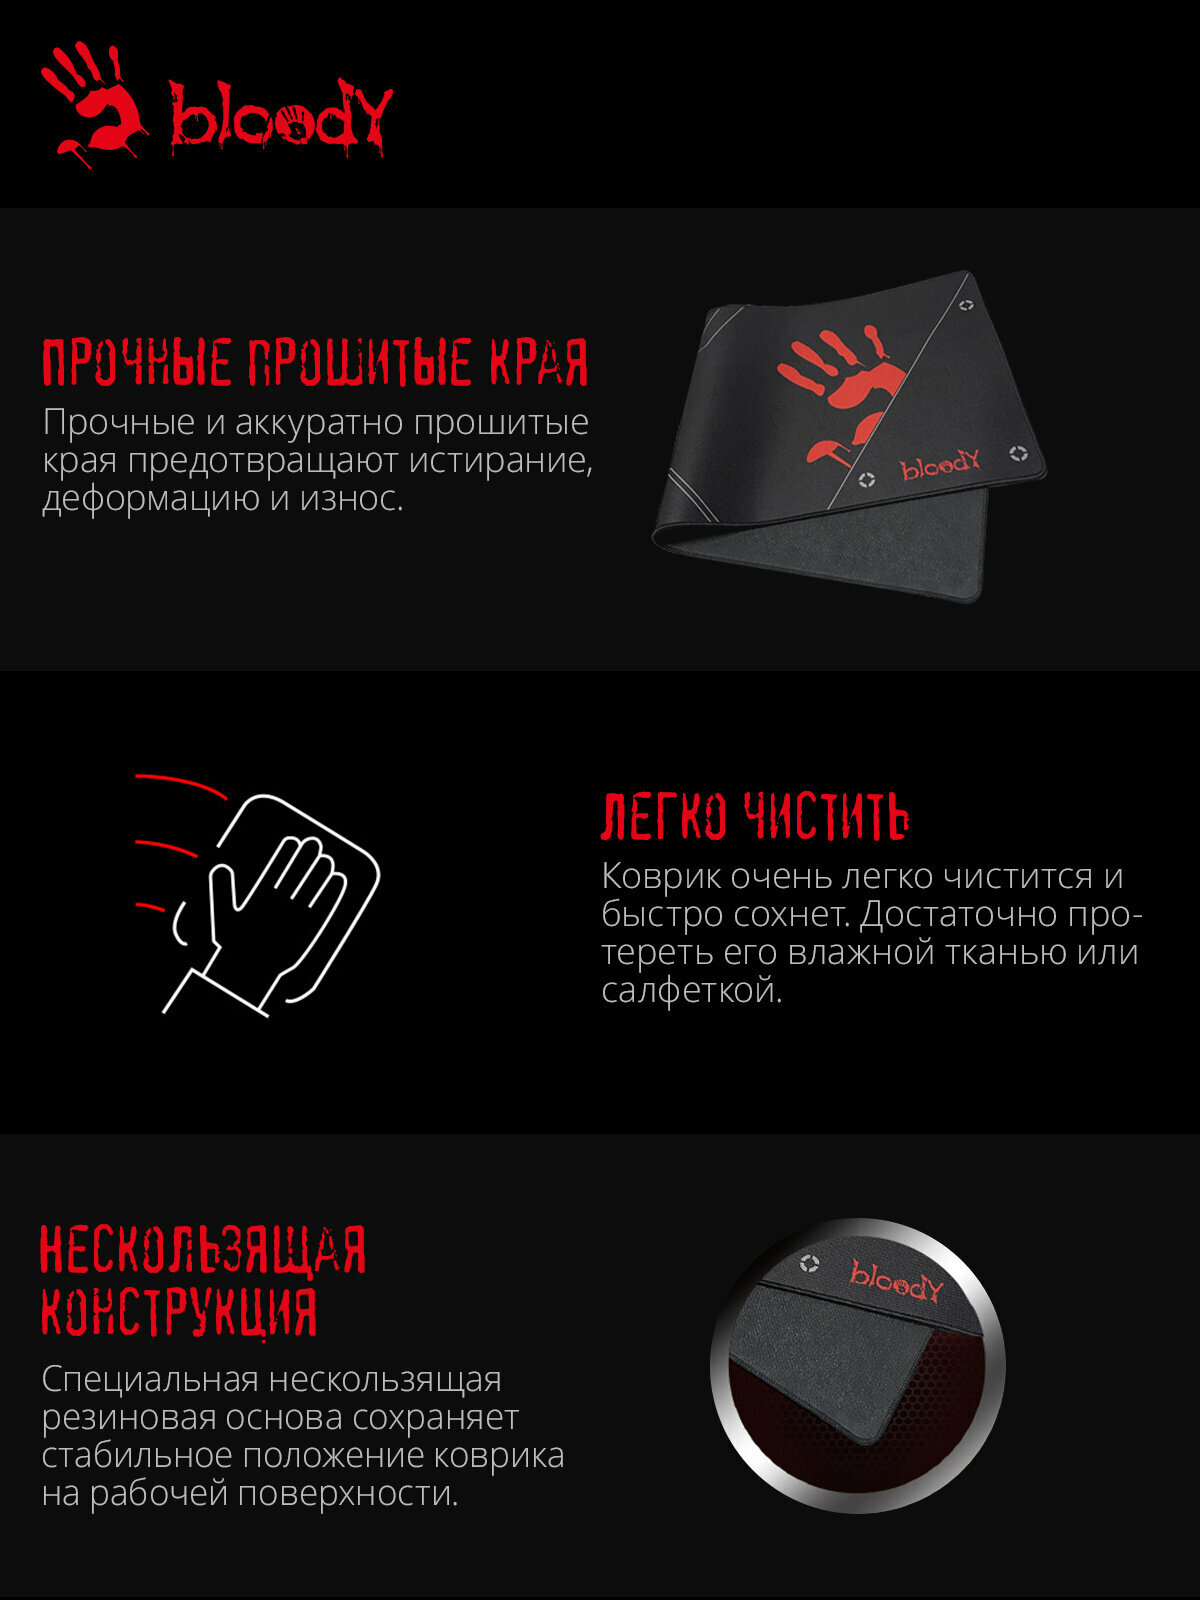 Blacklist device bloody mouse rust обход фото 32